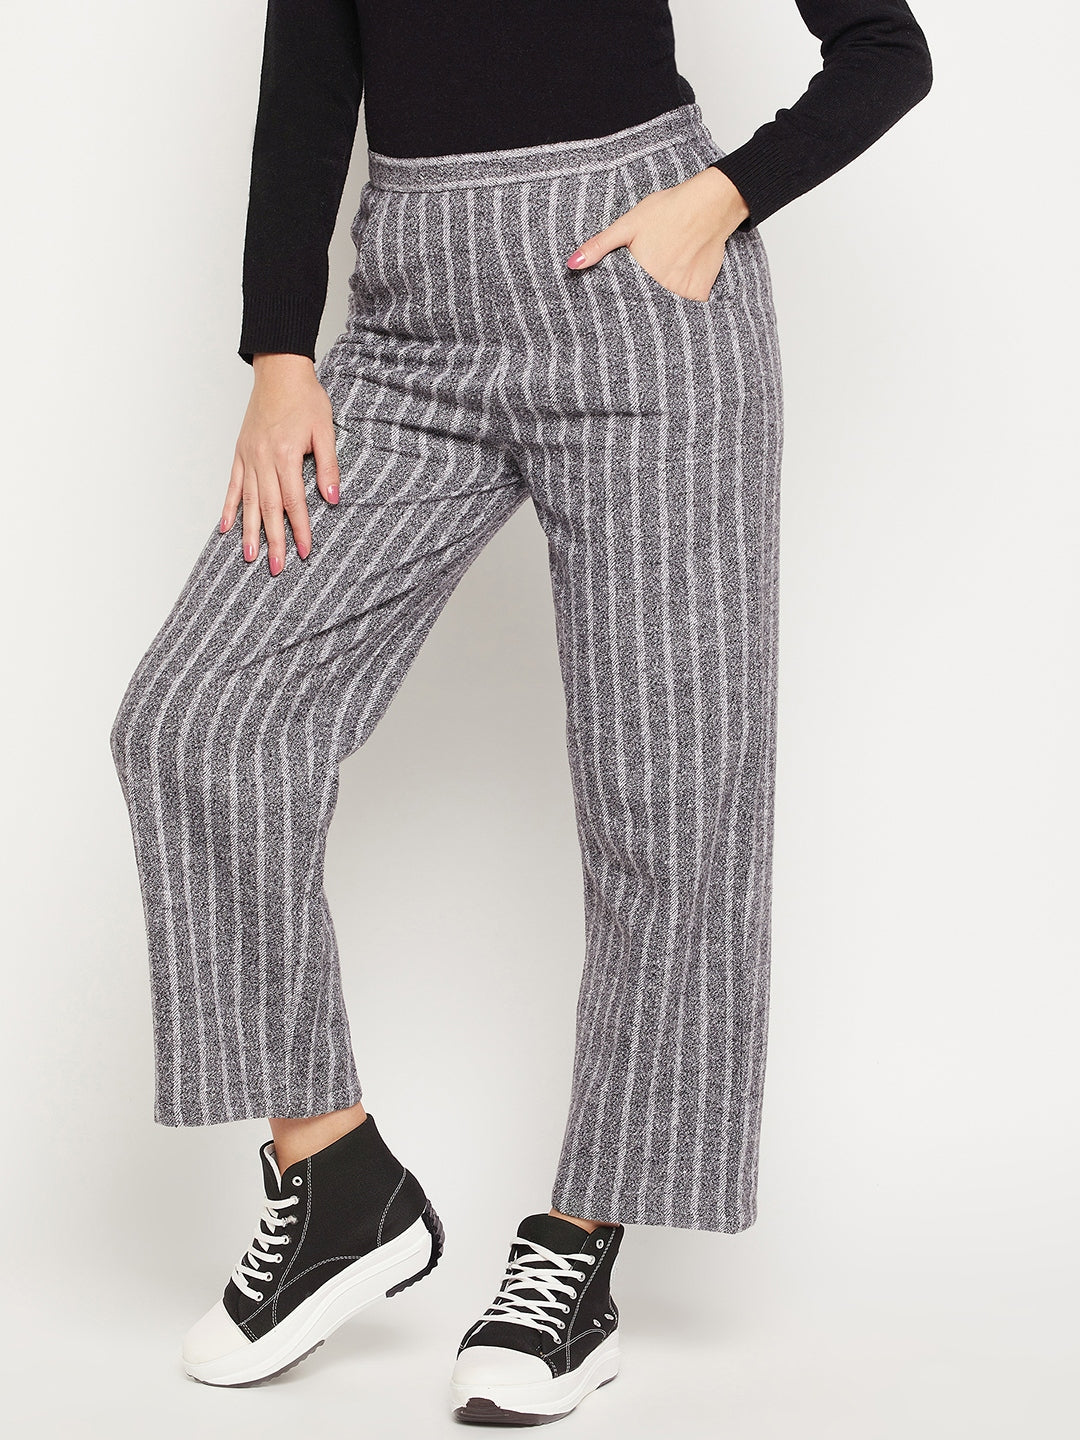 Buy Gray White Stripe Regular Fit Solid Trouser Cotton for Best Price  Reviews Free Shipping